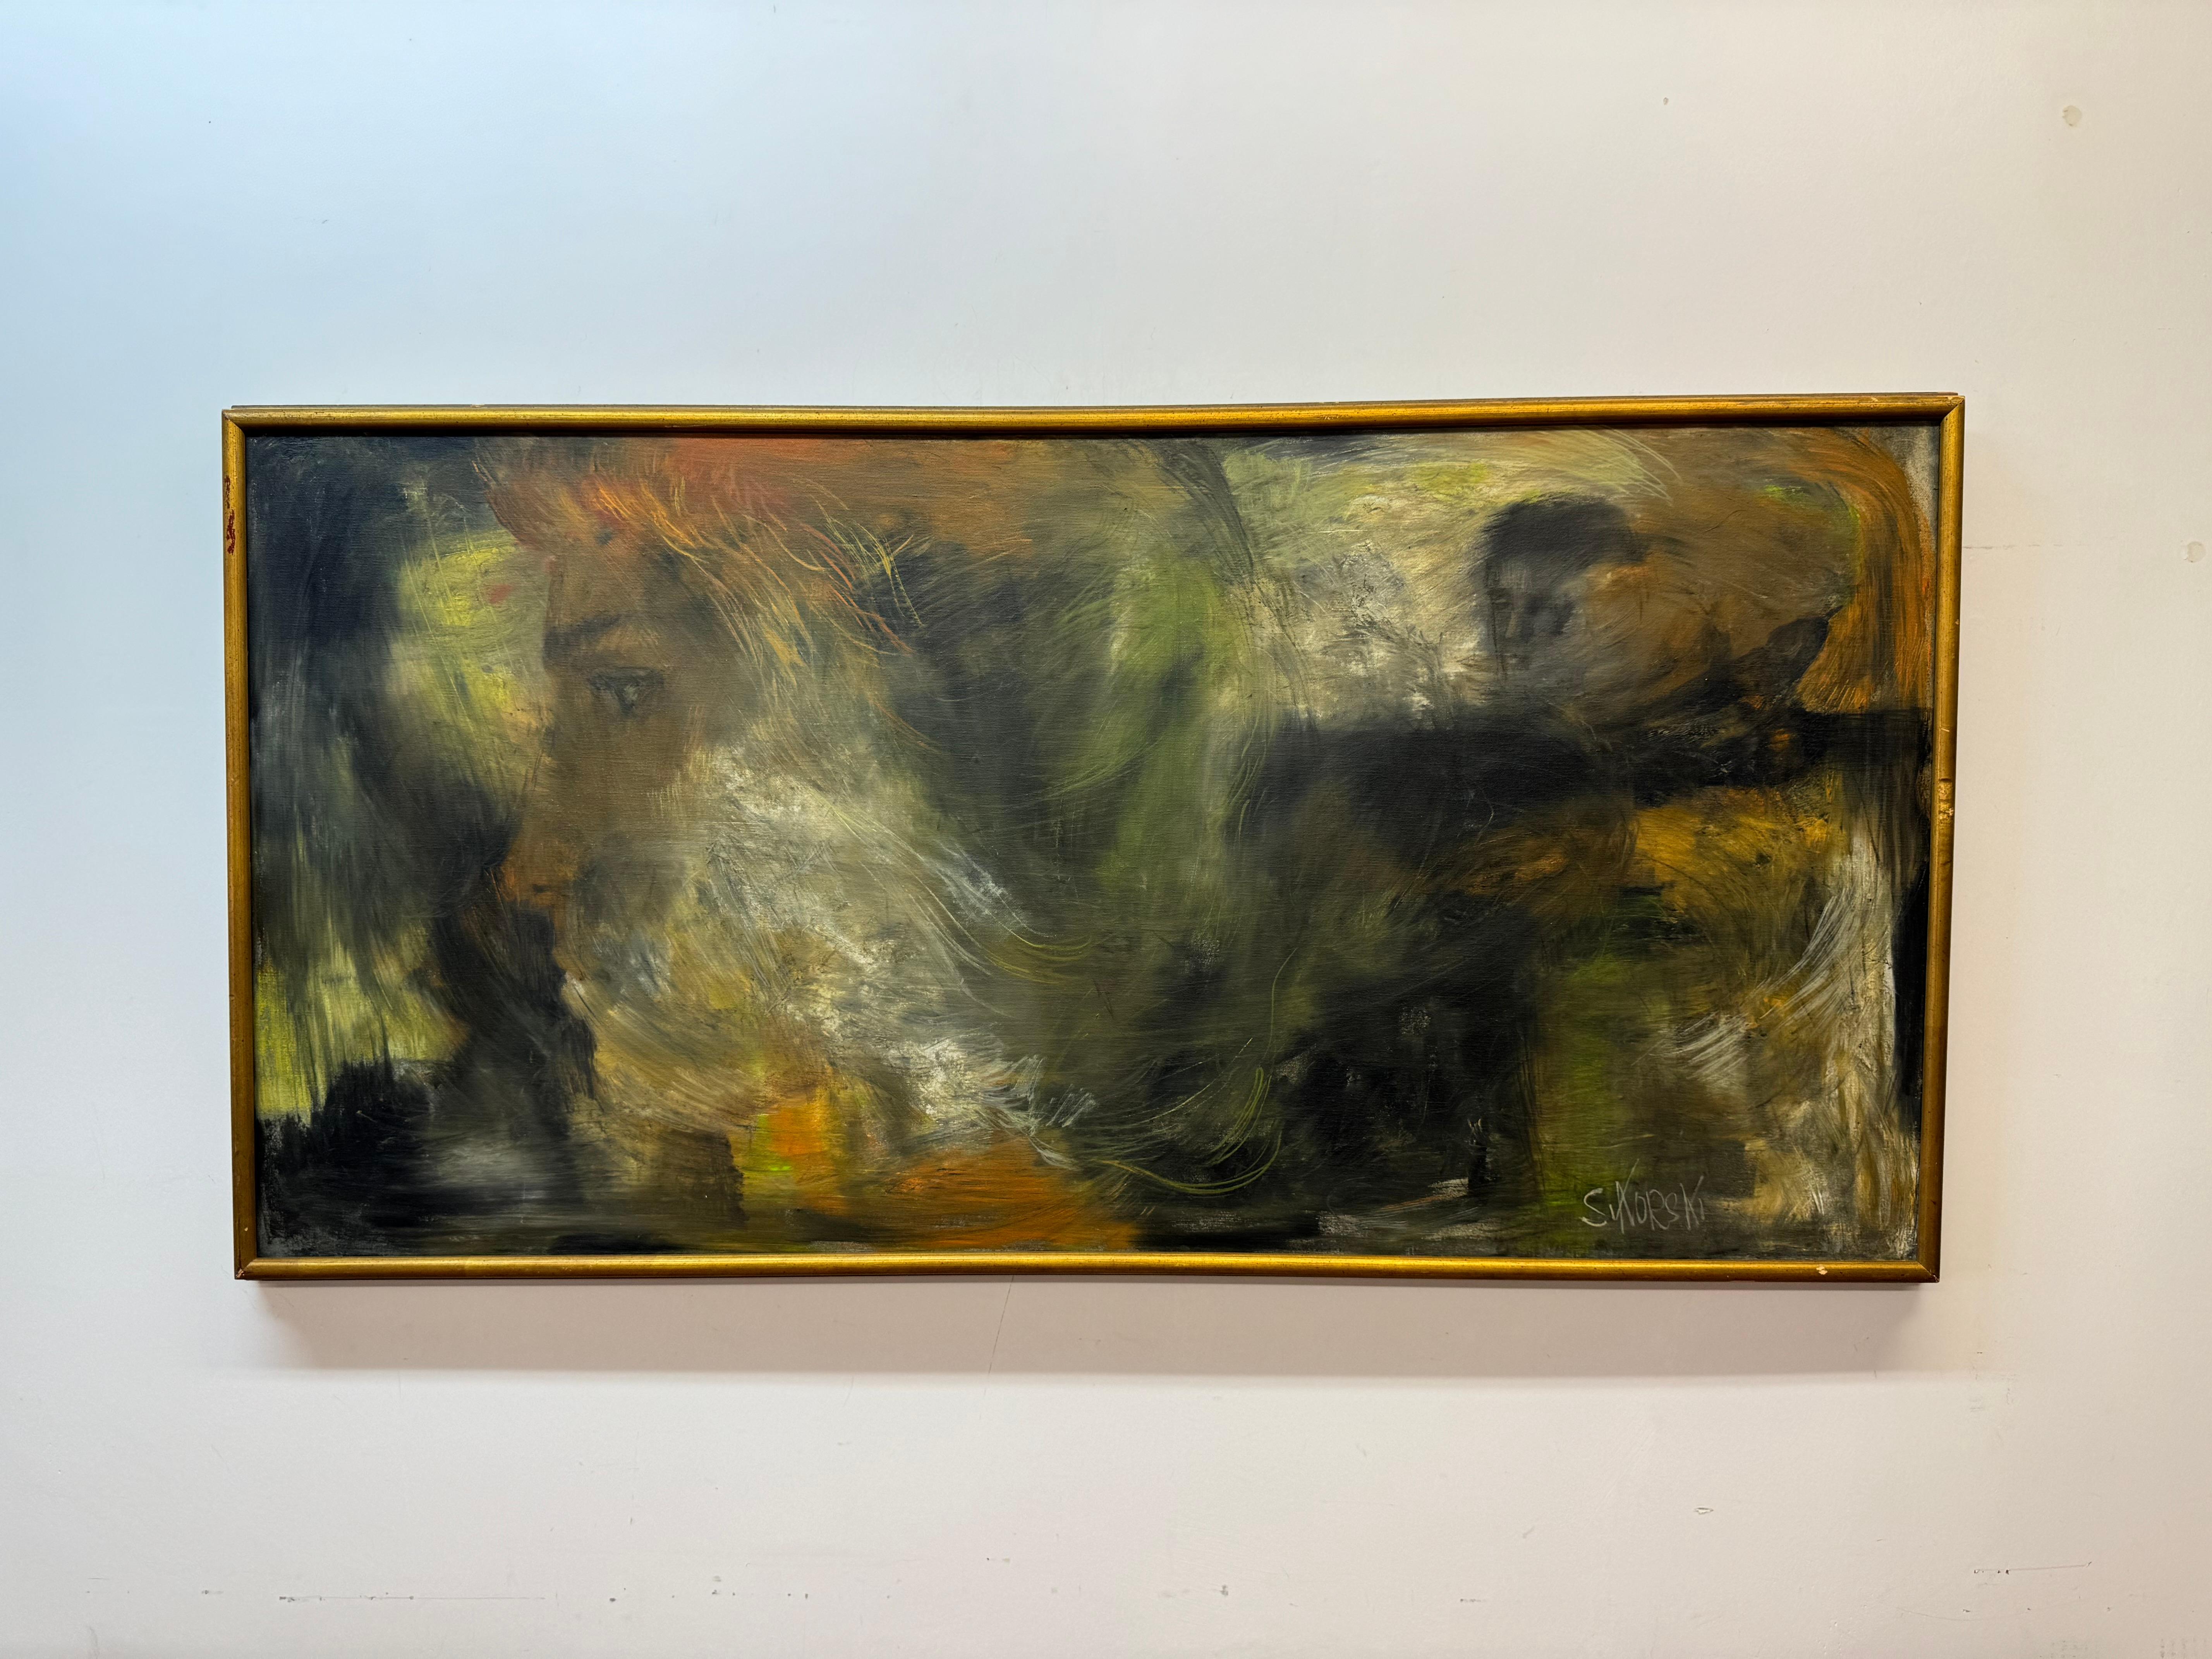 Eva Sikorski (1917-1990) abstract portrait, painting by listed Berman born California artist. Classic impressionistic style with muted colors. Oil on canvas. Excellent condition in lightly distressed frame 24 x 48 on framed, 25.5 x 49.5 framed. 